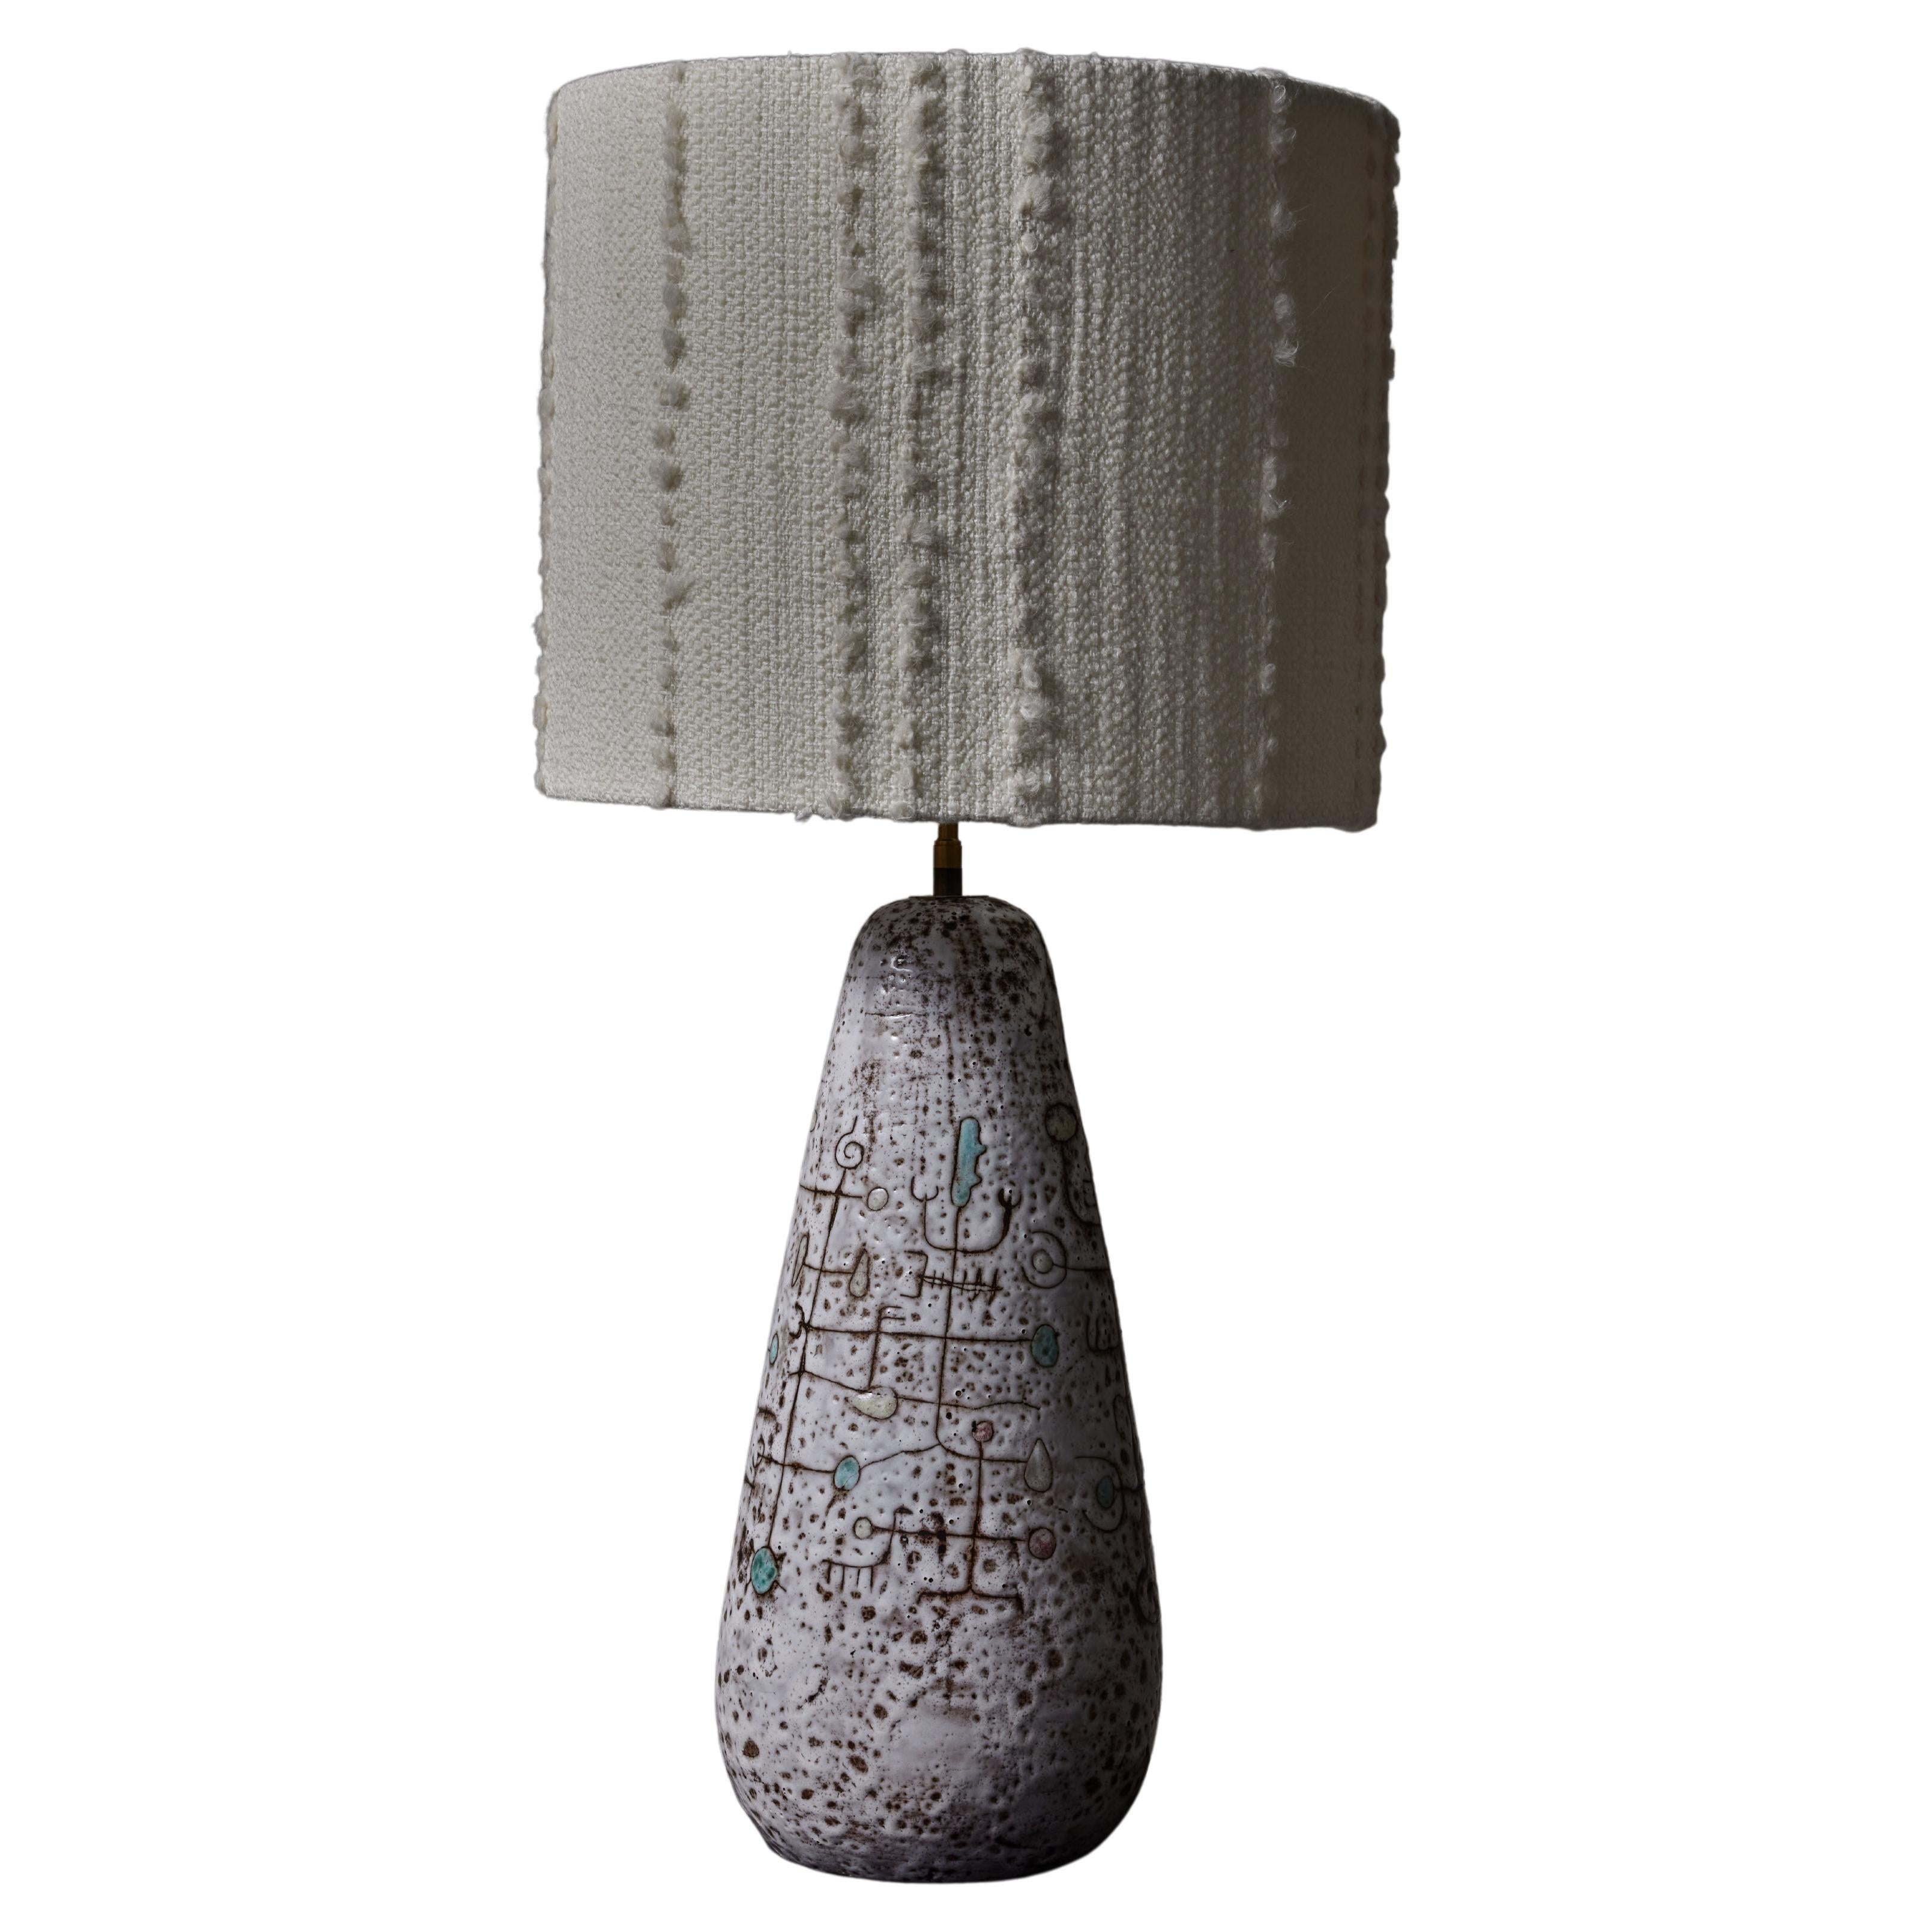 Tall Juliette and Jean Rivier Ceramic Table Lamp For Sale